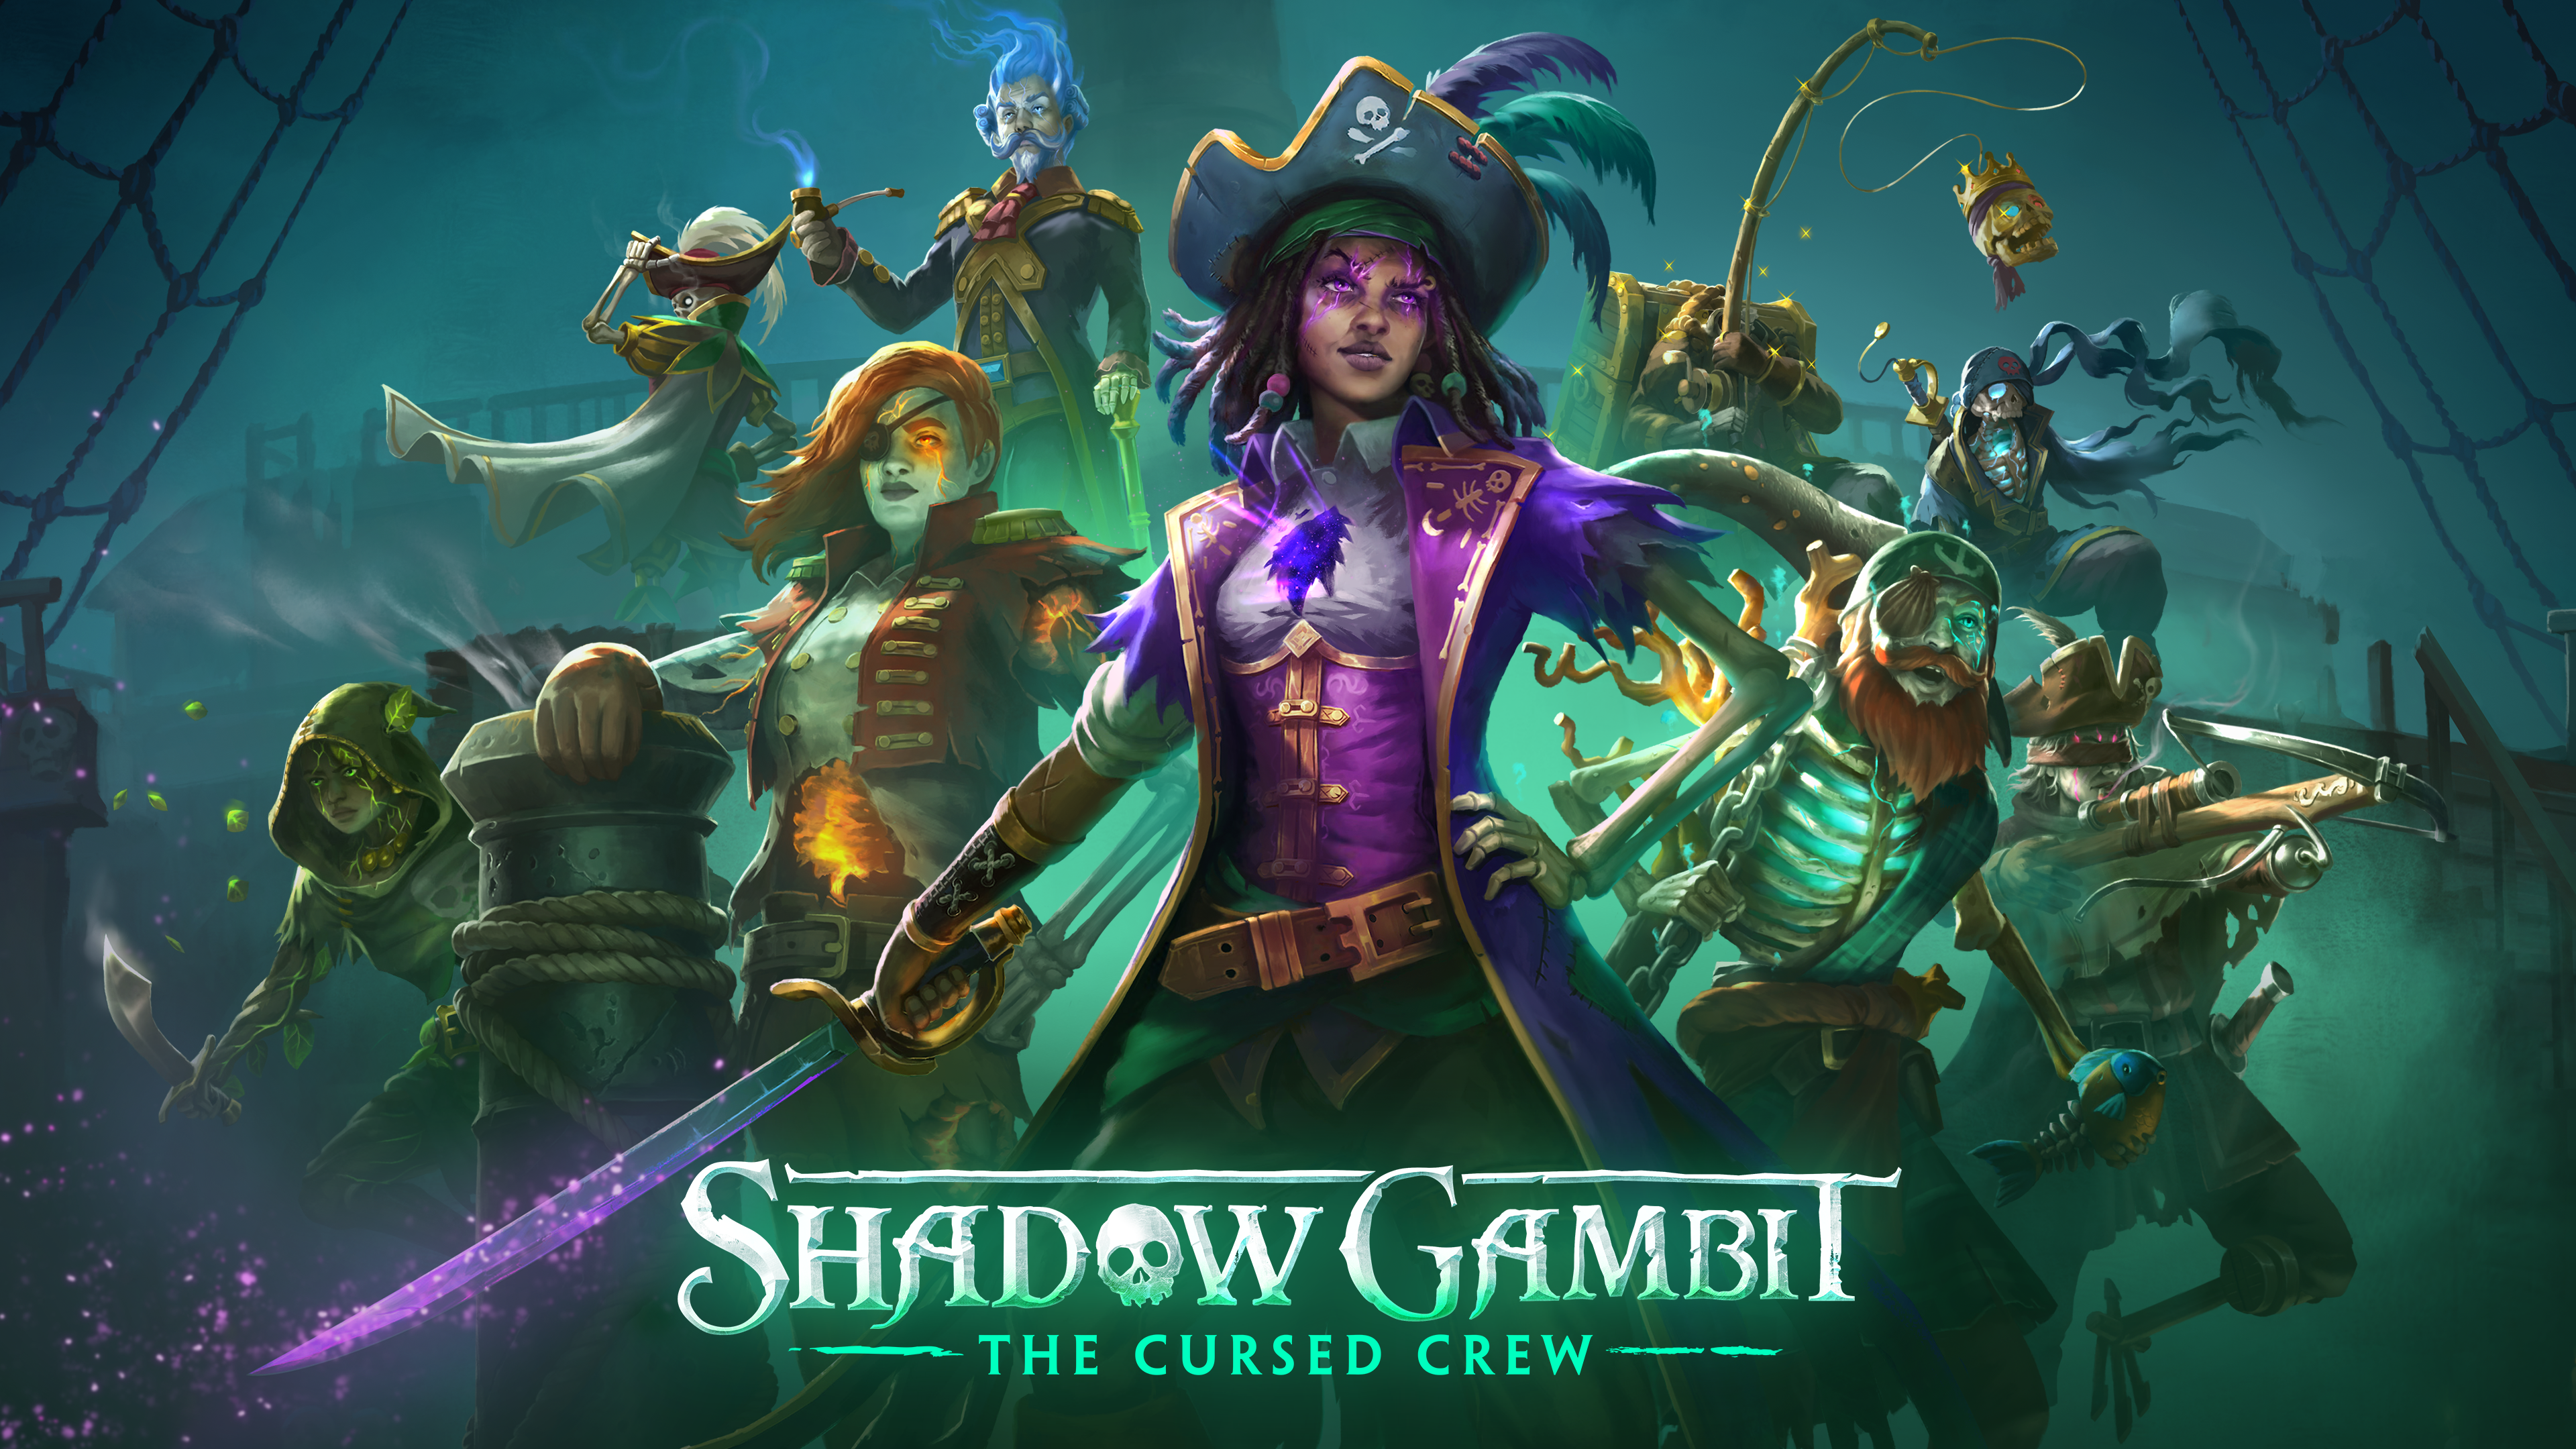 20% Shadow Gambit: The Cursed Crew on